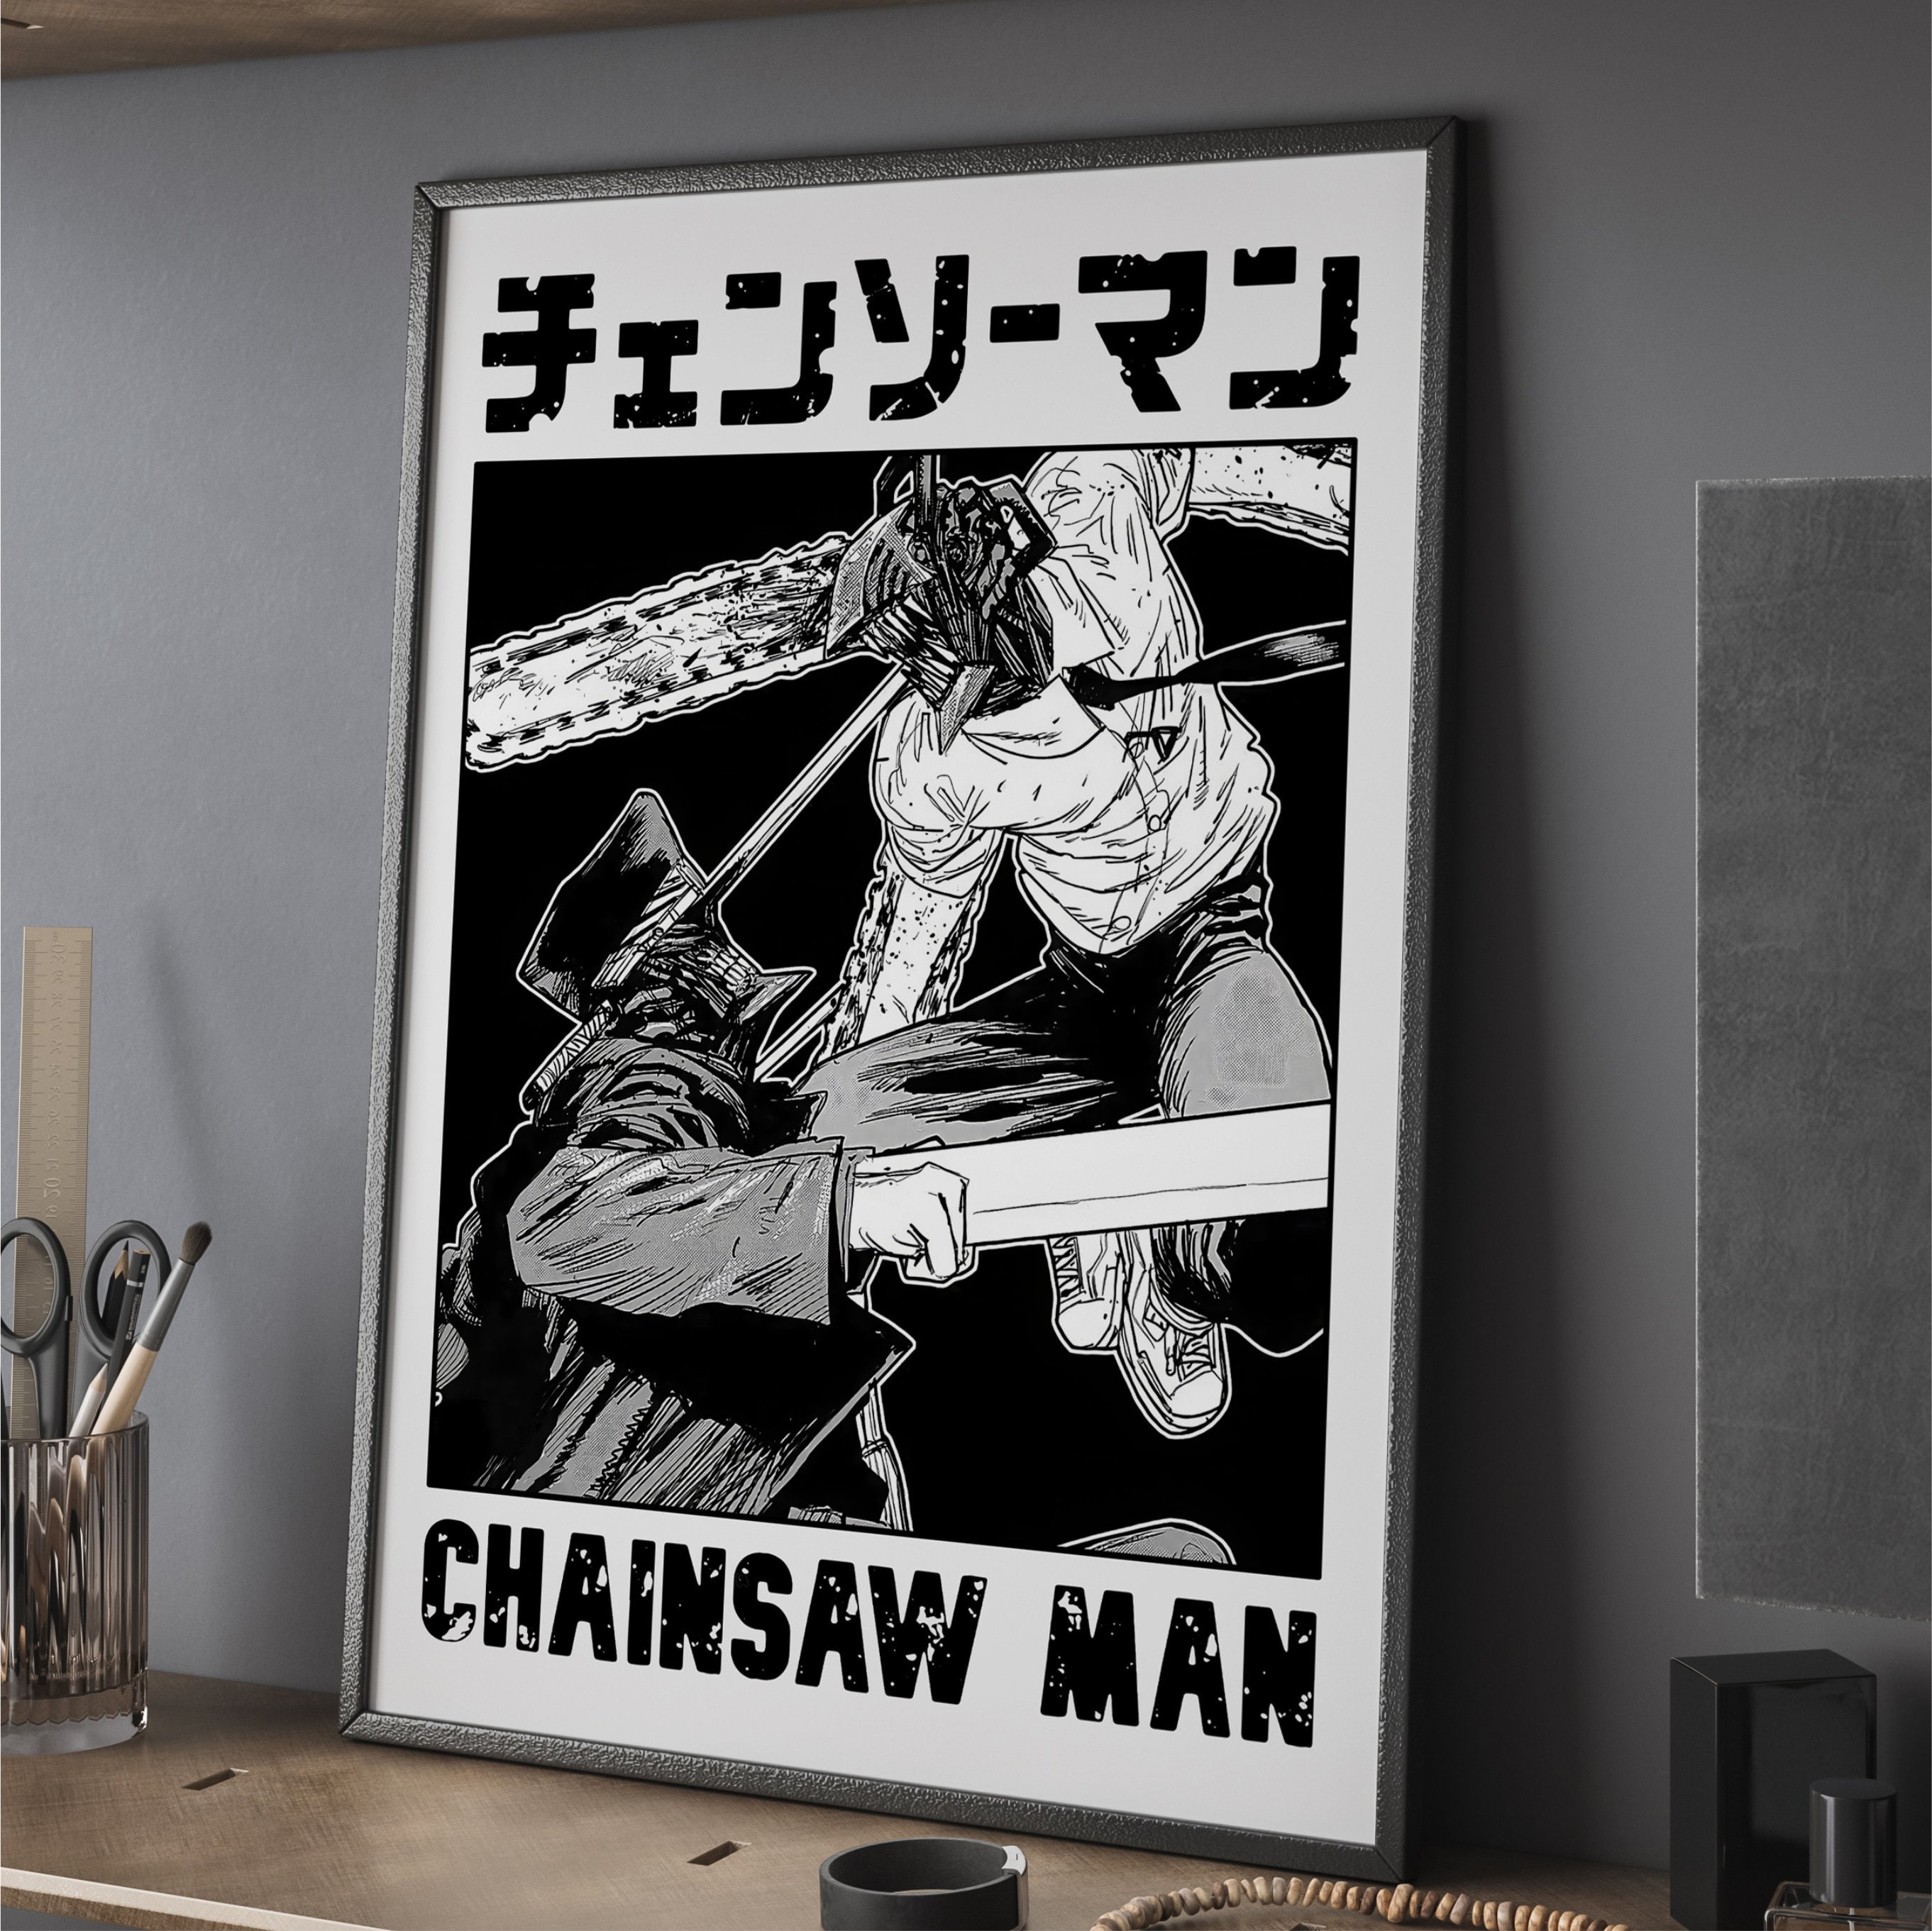 Chainsaw Man Official Anime Art Book CSM + Poster + Stickers